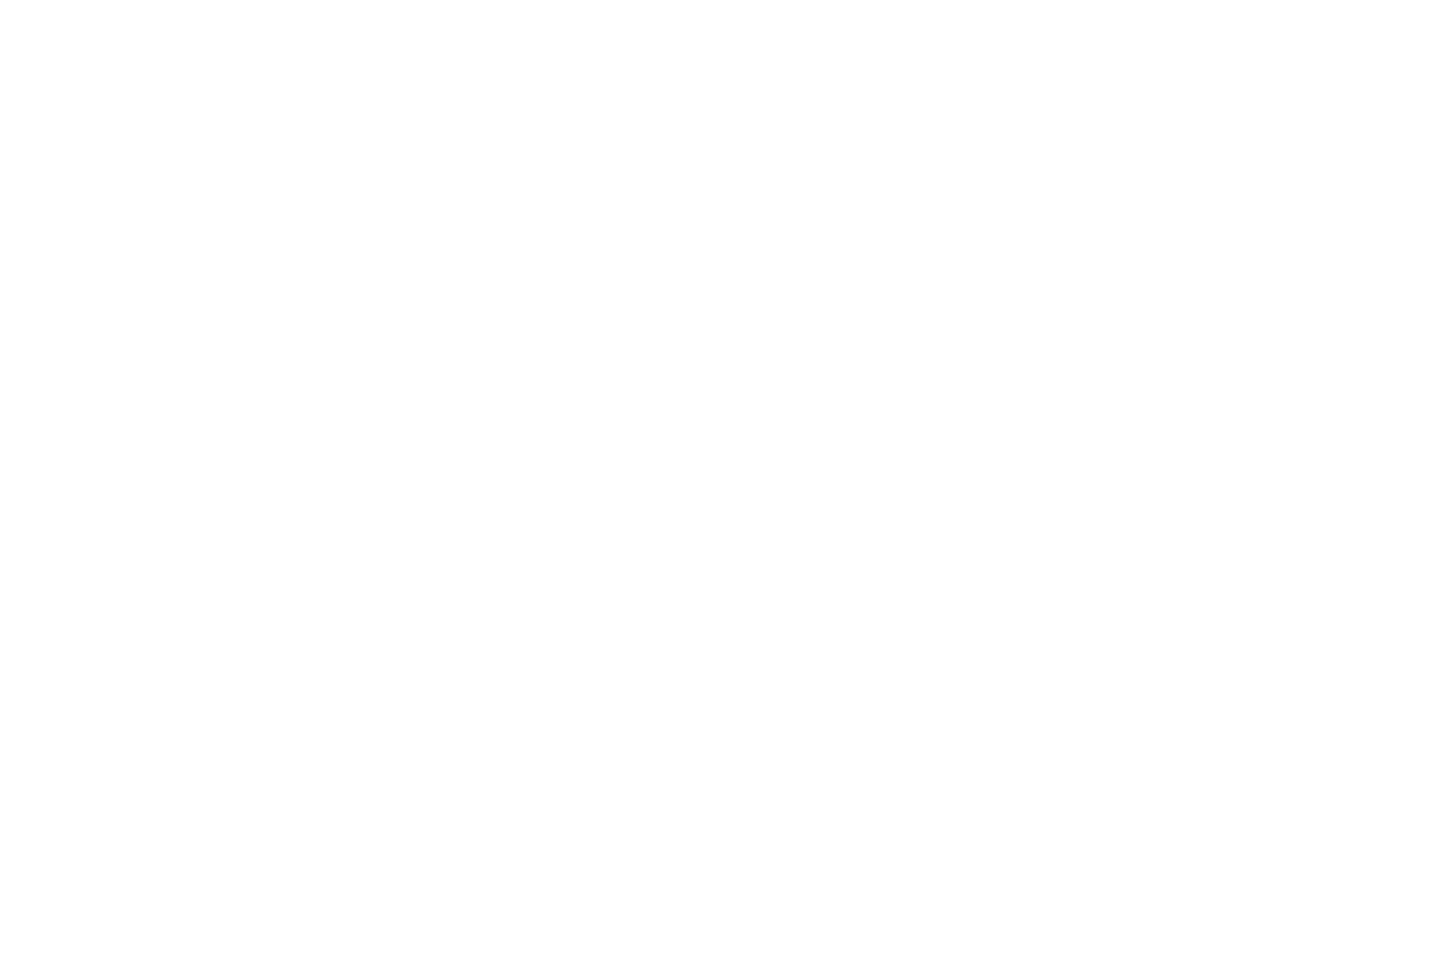 For the important step to create worth. | 価値を生み出す大切な一歩のために。